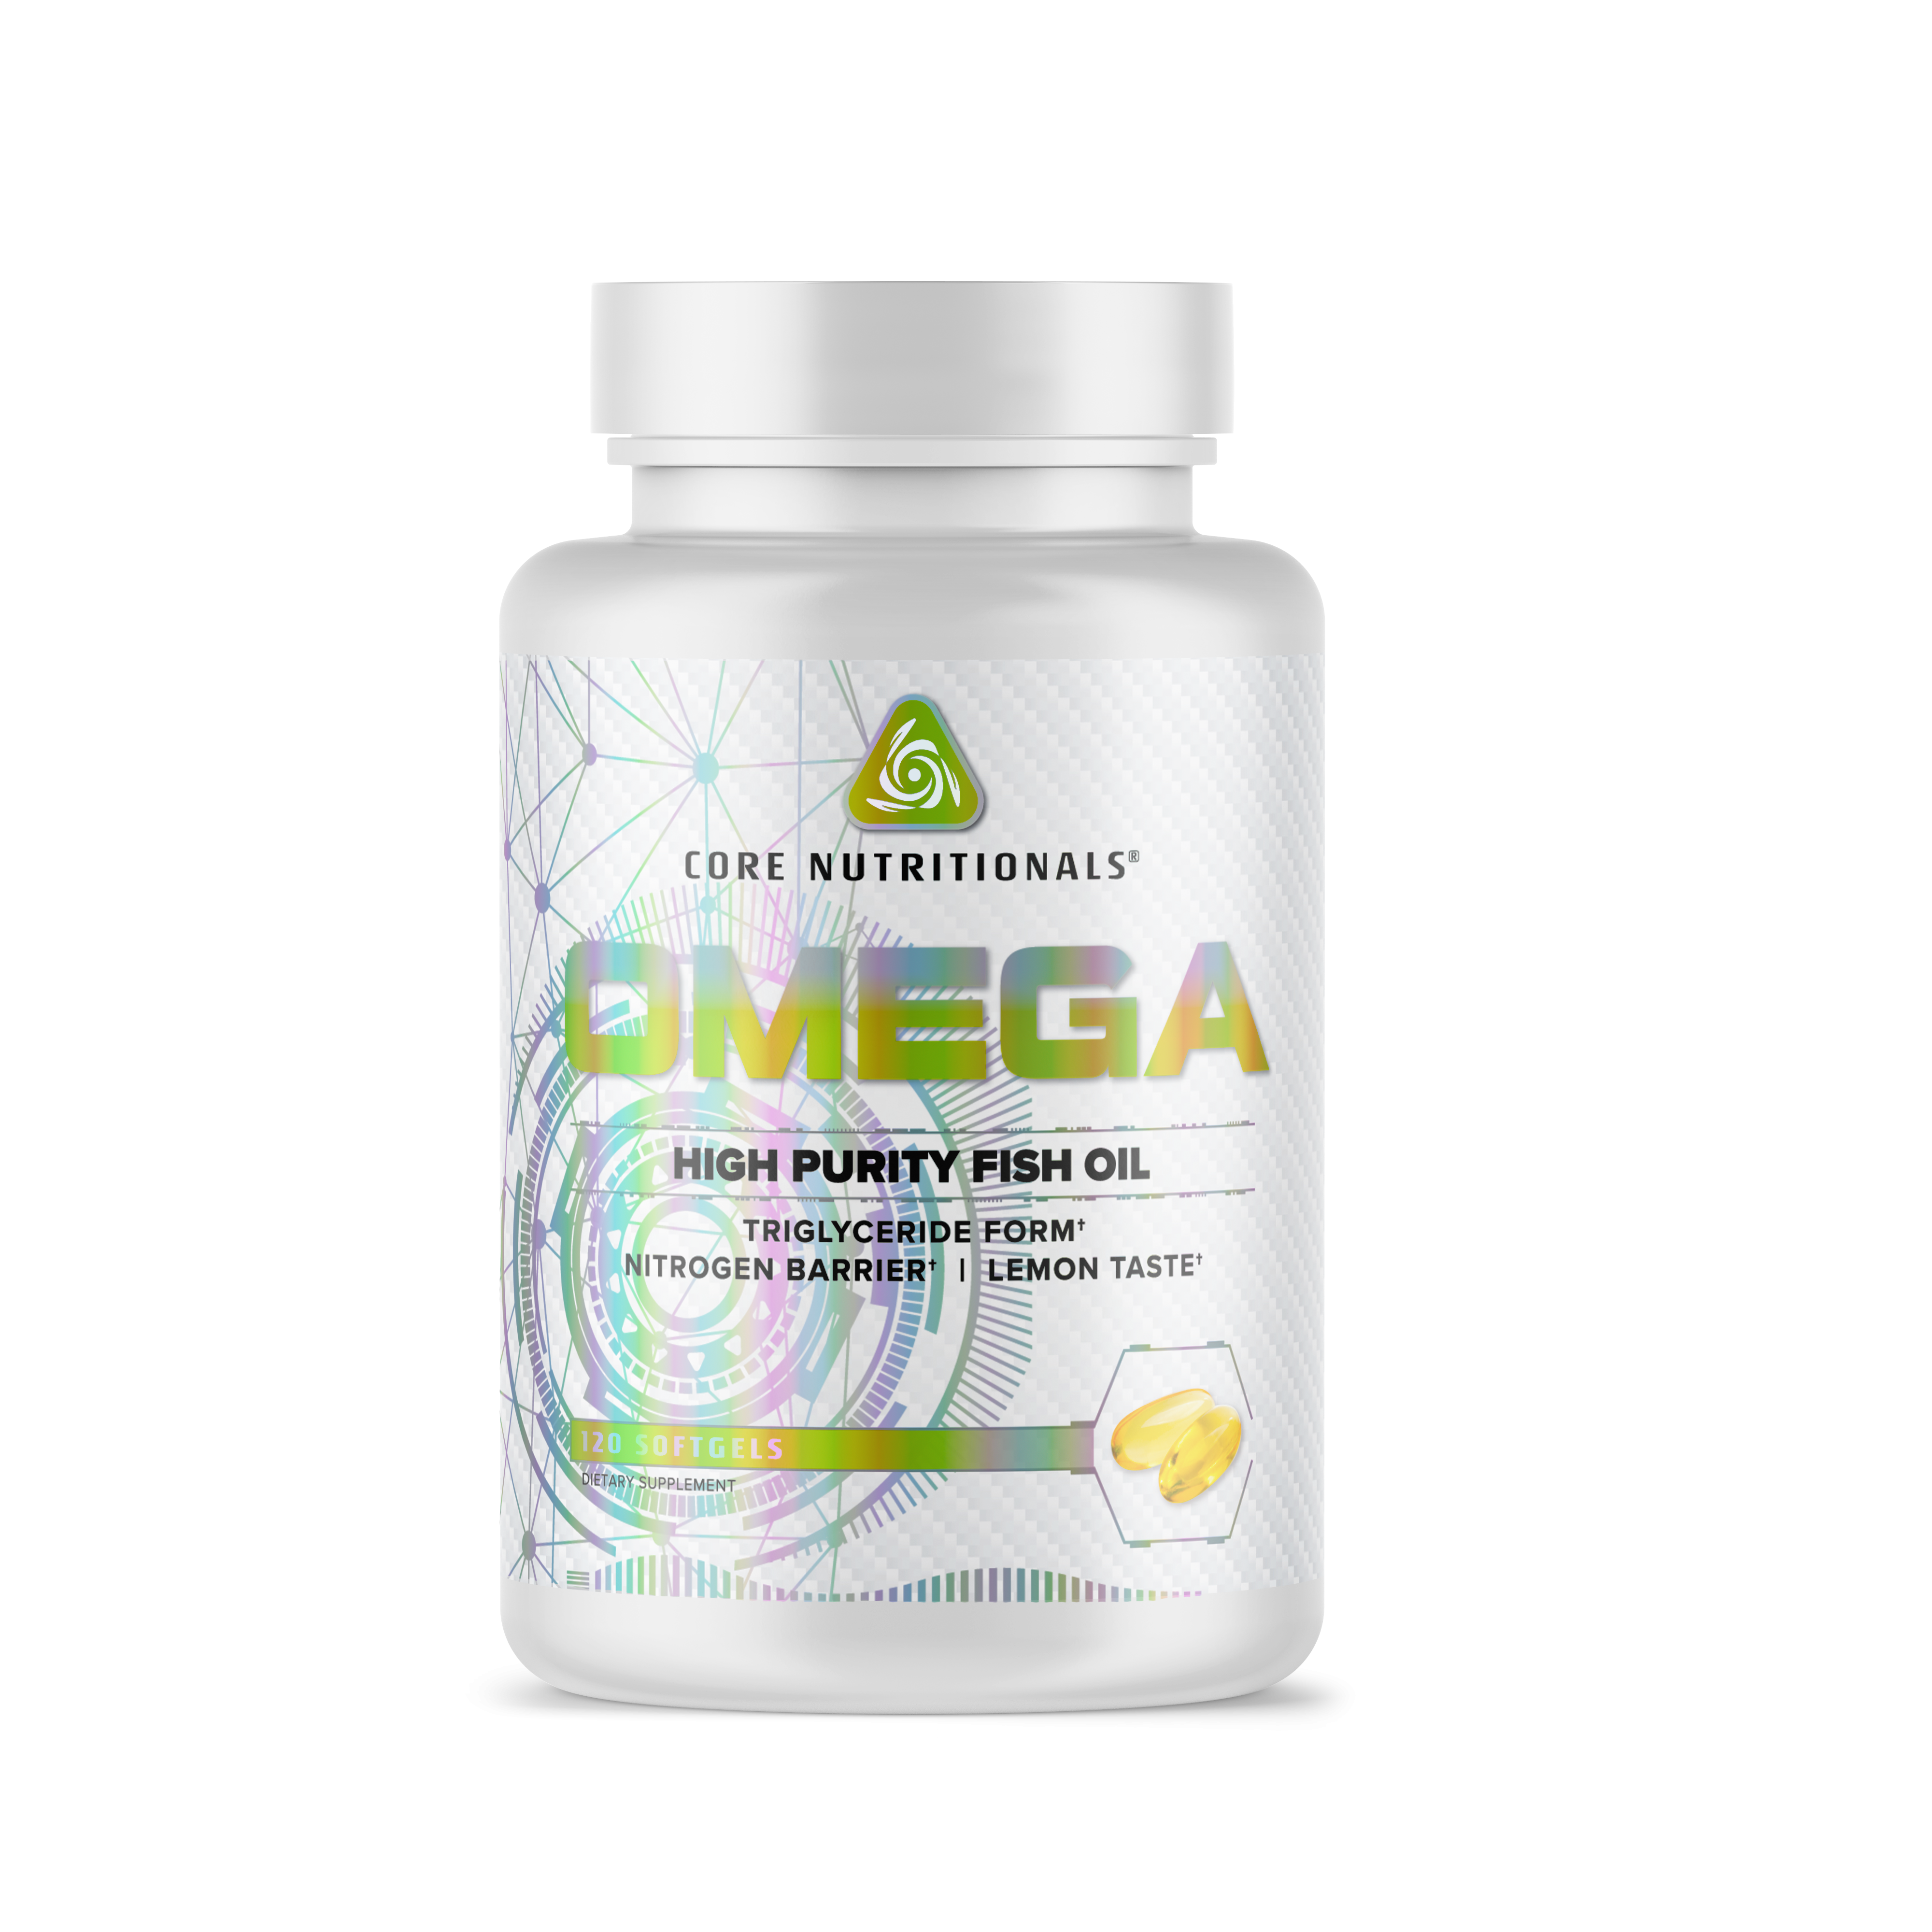 Core Nutritionals OMEGA – General Health – Professional Supplements & Protein From A-list Nutrition